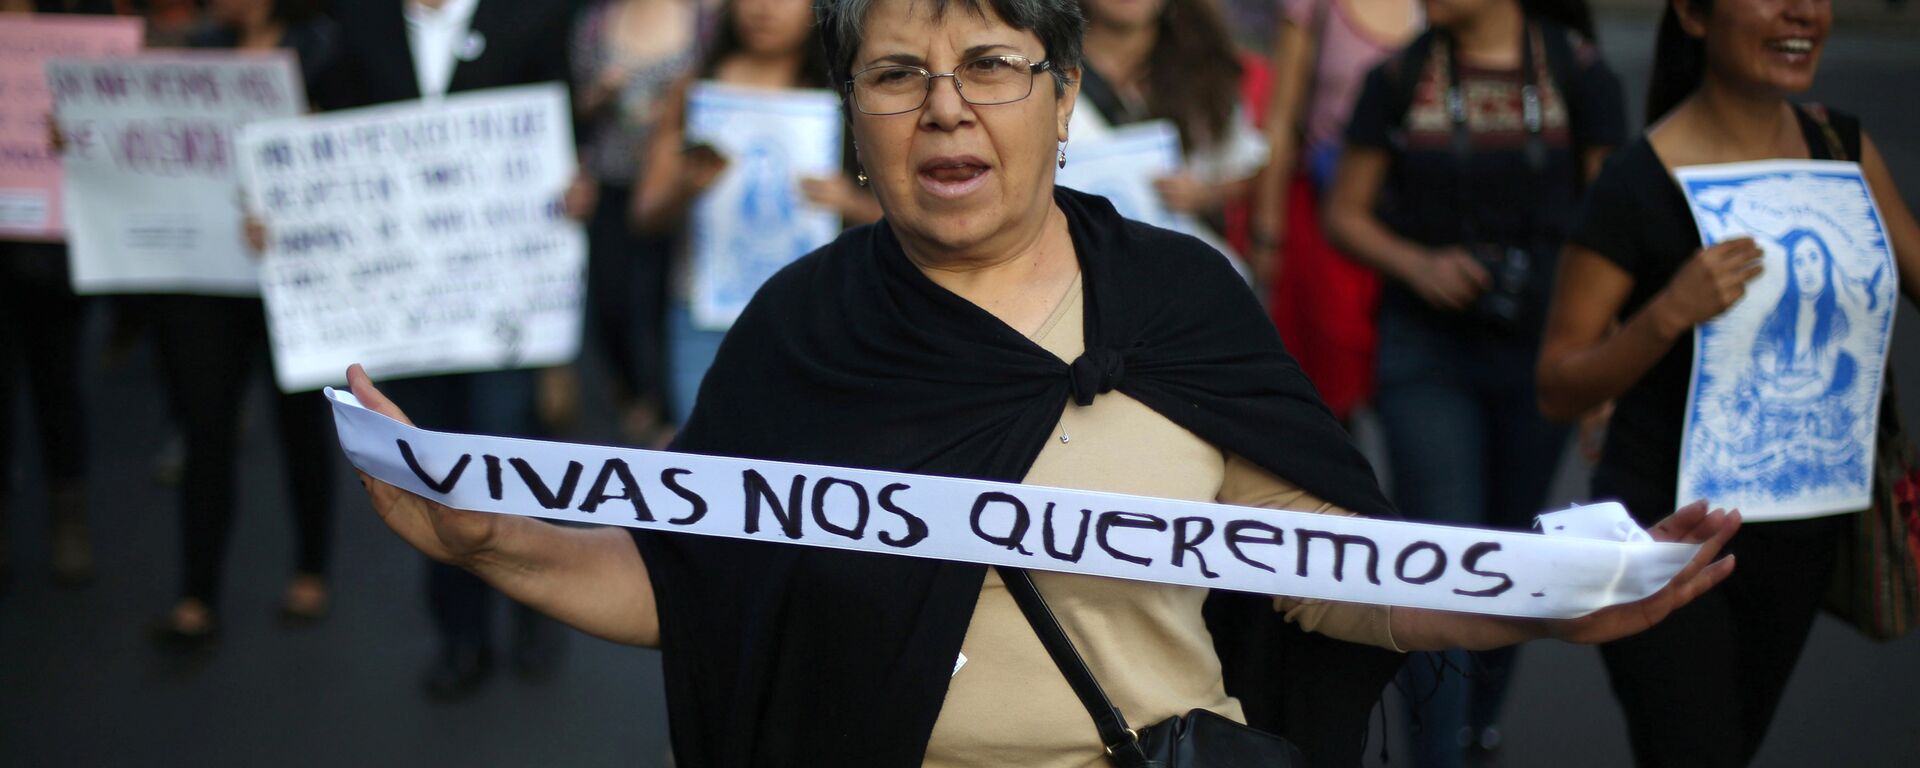 A woman takes part in a march to protest violence against women and the murder of a 16-year-old girl in a coastal town of Argentina last week, at Reforma avenue, in Mexico City, Mexico, October 19, 2016 - Sputnik Mundo, 1920, 03.03.2021